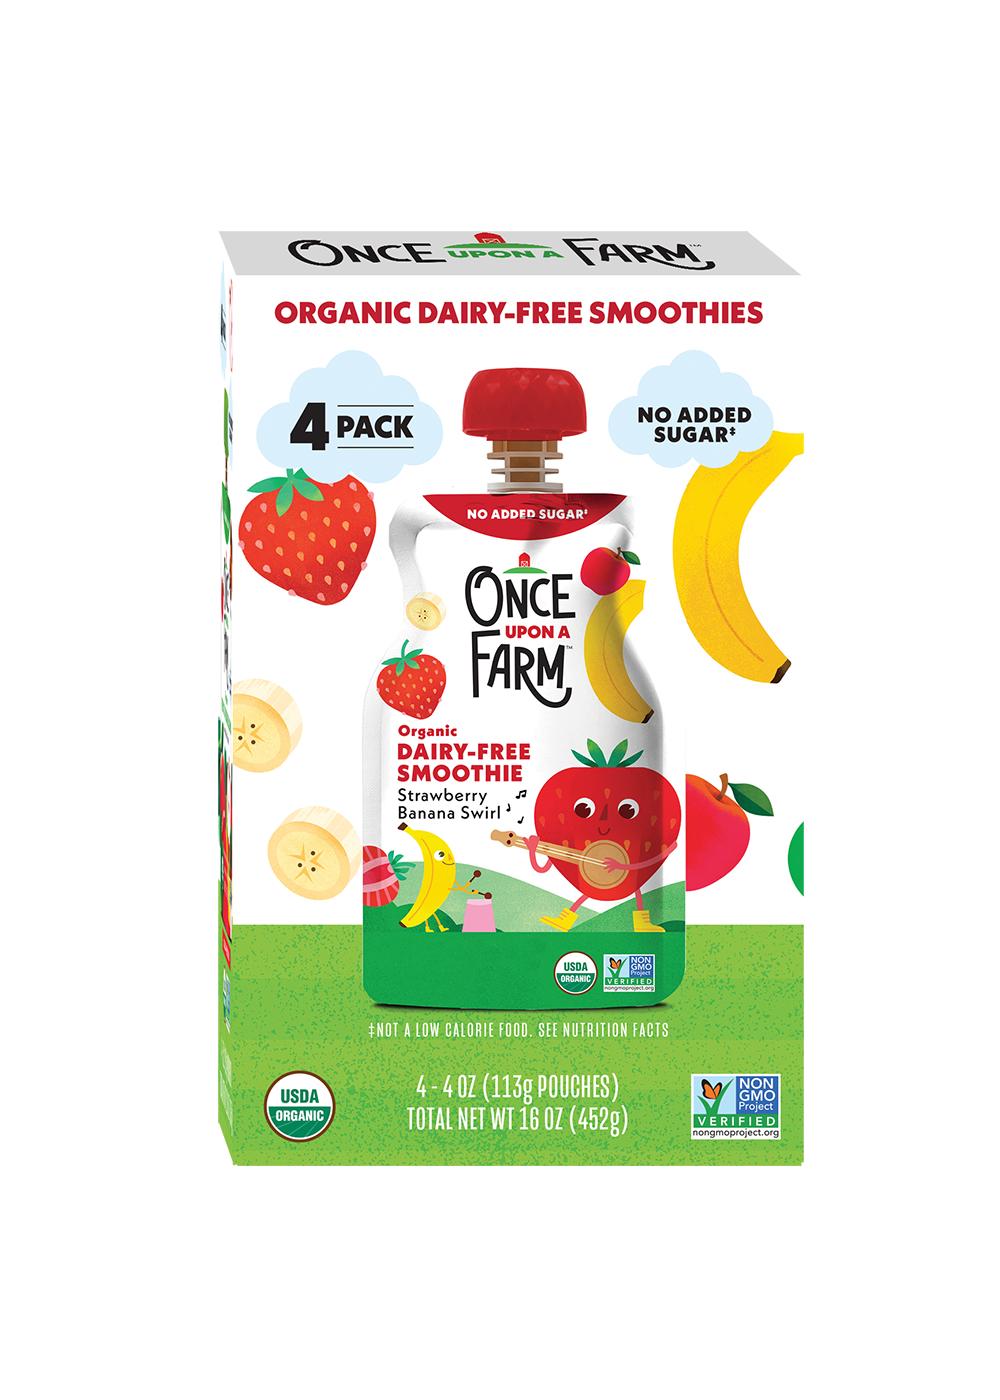 Once Upon a Farm Organic Smoothie Pouches - Strawberry Banana Swirl; image 1 of 2